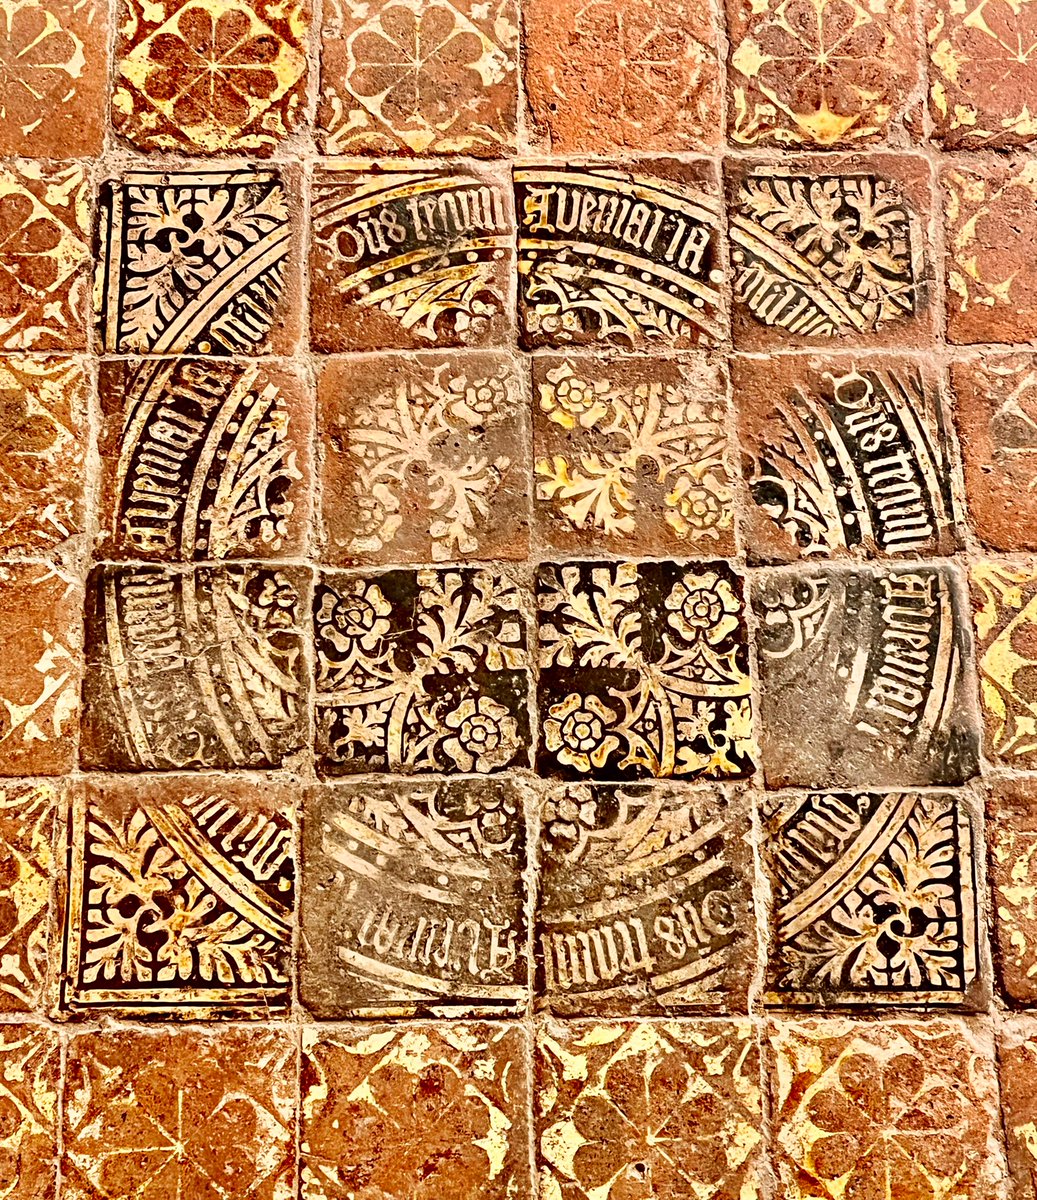 Floor tiles at Gloucester Cathedral.

#tilesontuesday